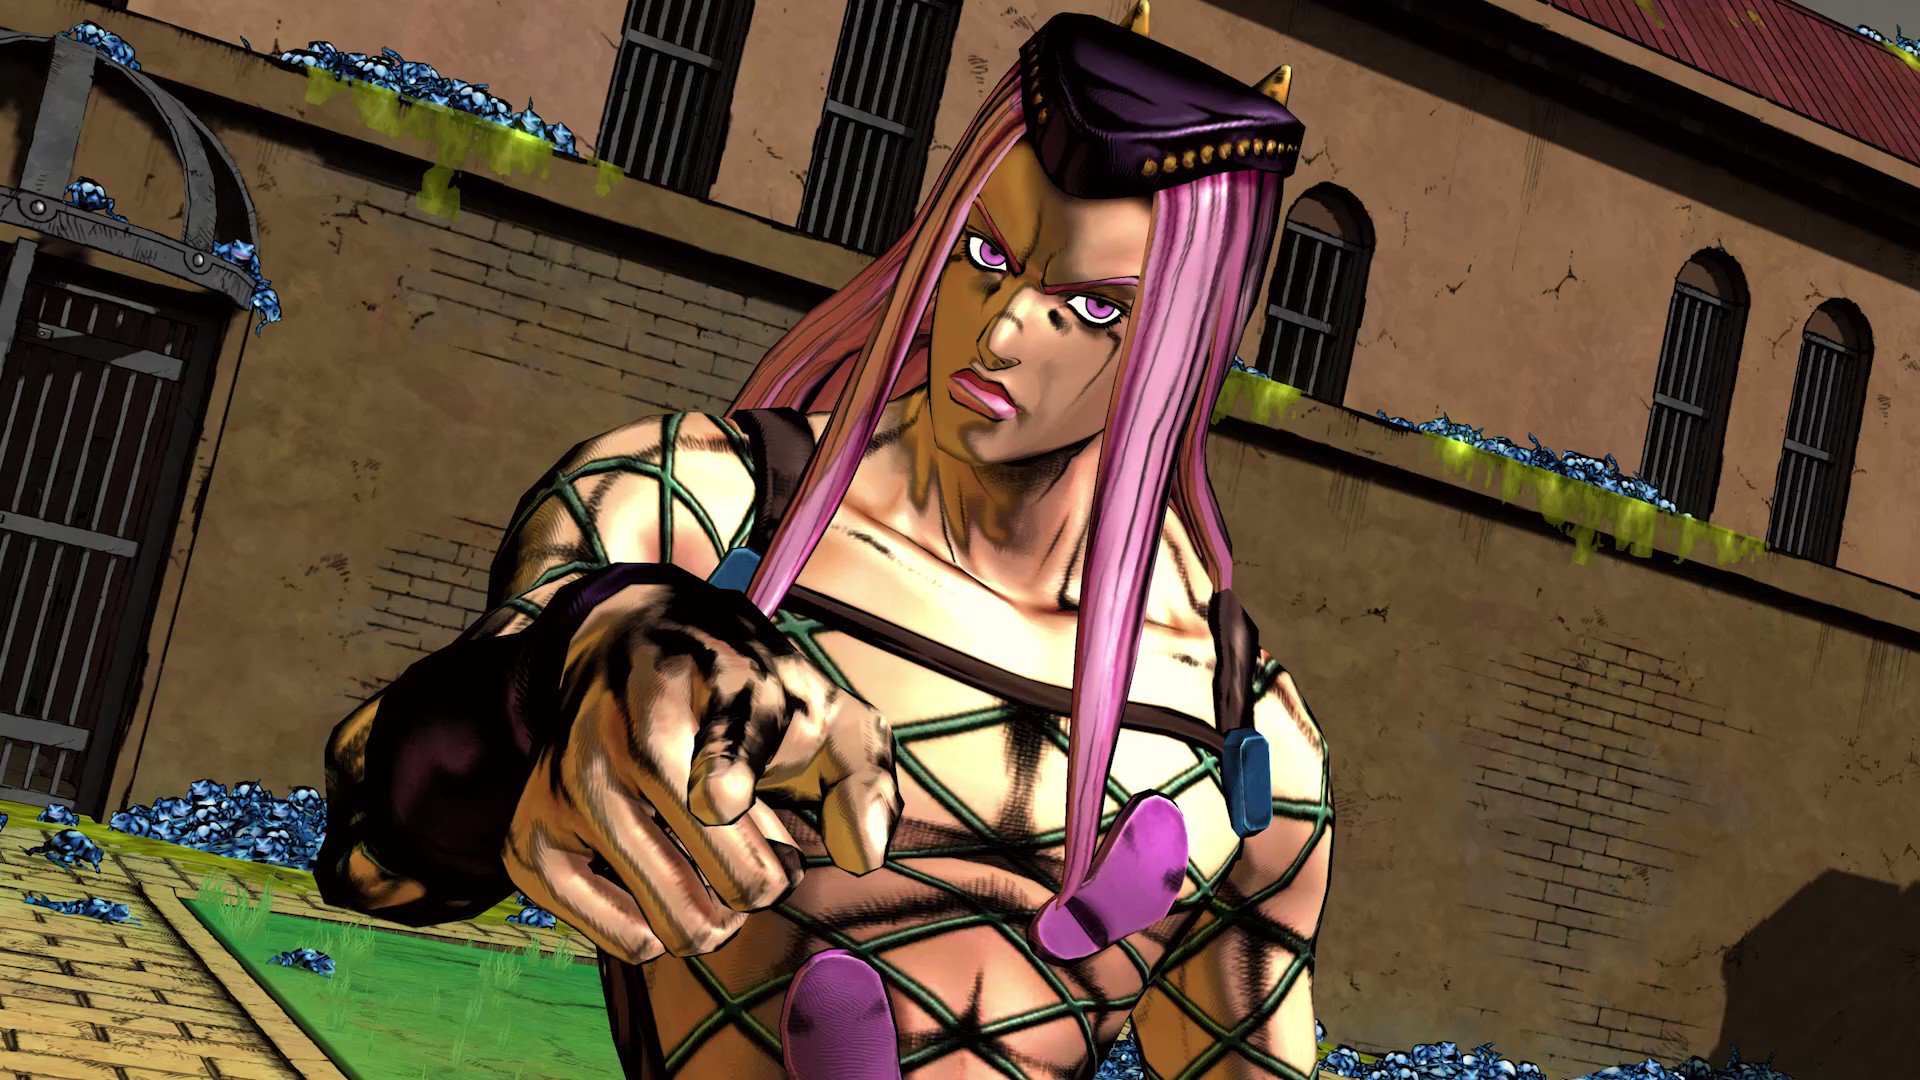 JoJo's Bizarre Adventure: All Star Battle R With A Strong, Close Range Stand And Ready To Protect Jolyne With Everything He Has, Narciso Anastasia Is Ready For Battle In JoJo's Bizarre